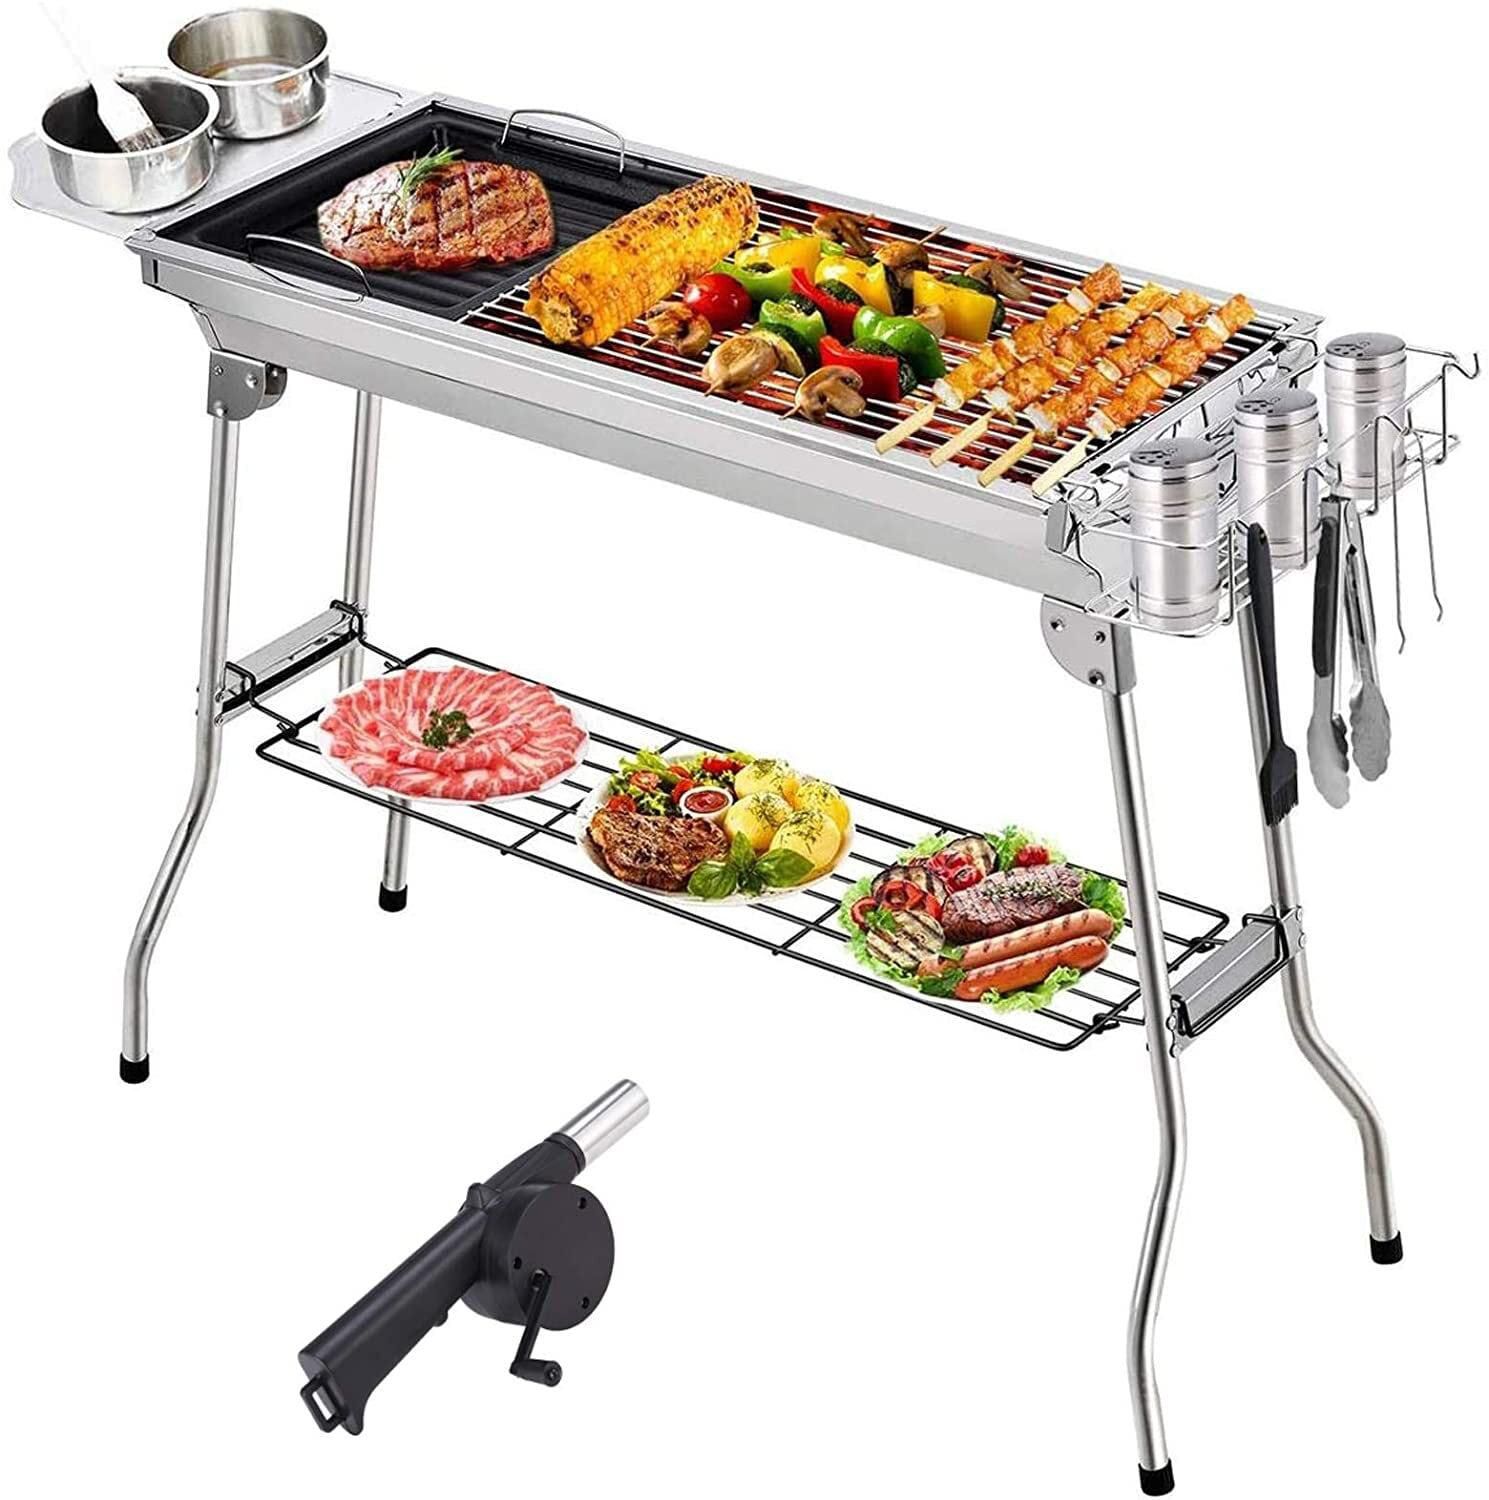 Charcoal Grill Kabab Grills Portable BBQ - Stainless Steel Folding BBQ Camping Grill Large Hibachi Grill Shish Kabob Portable Camping Cooking for Travel Grill Outdoor